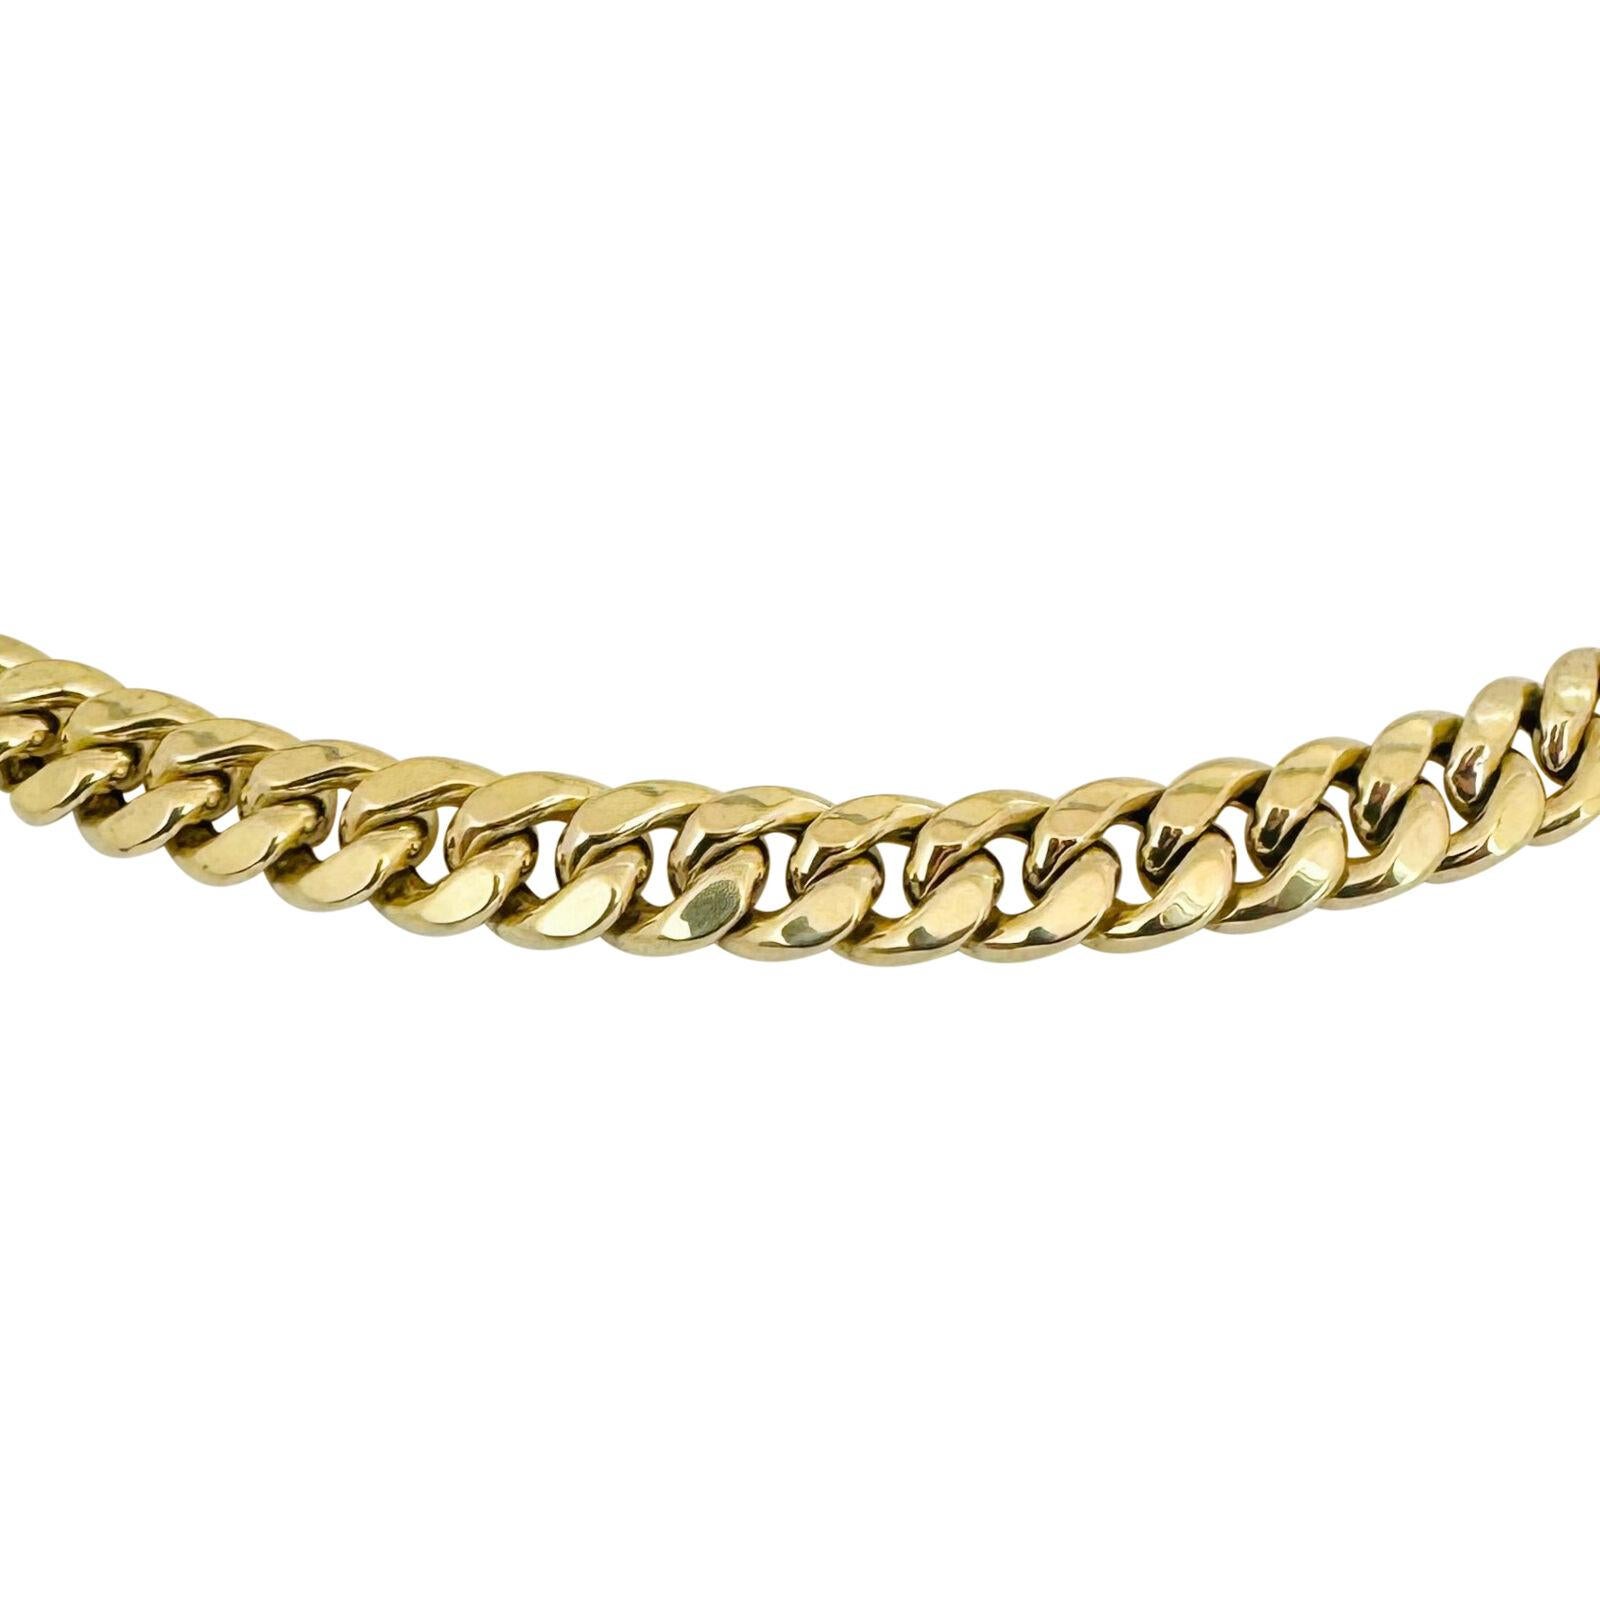 10k Yellow Gold 45.7g Hollow Polished 8.5mm Cuban Curb Link Chain Necklace 22